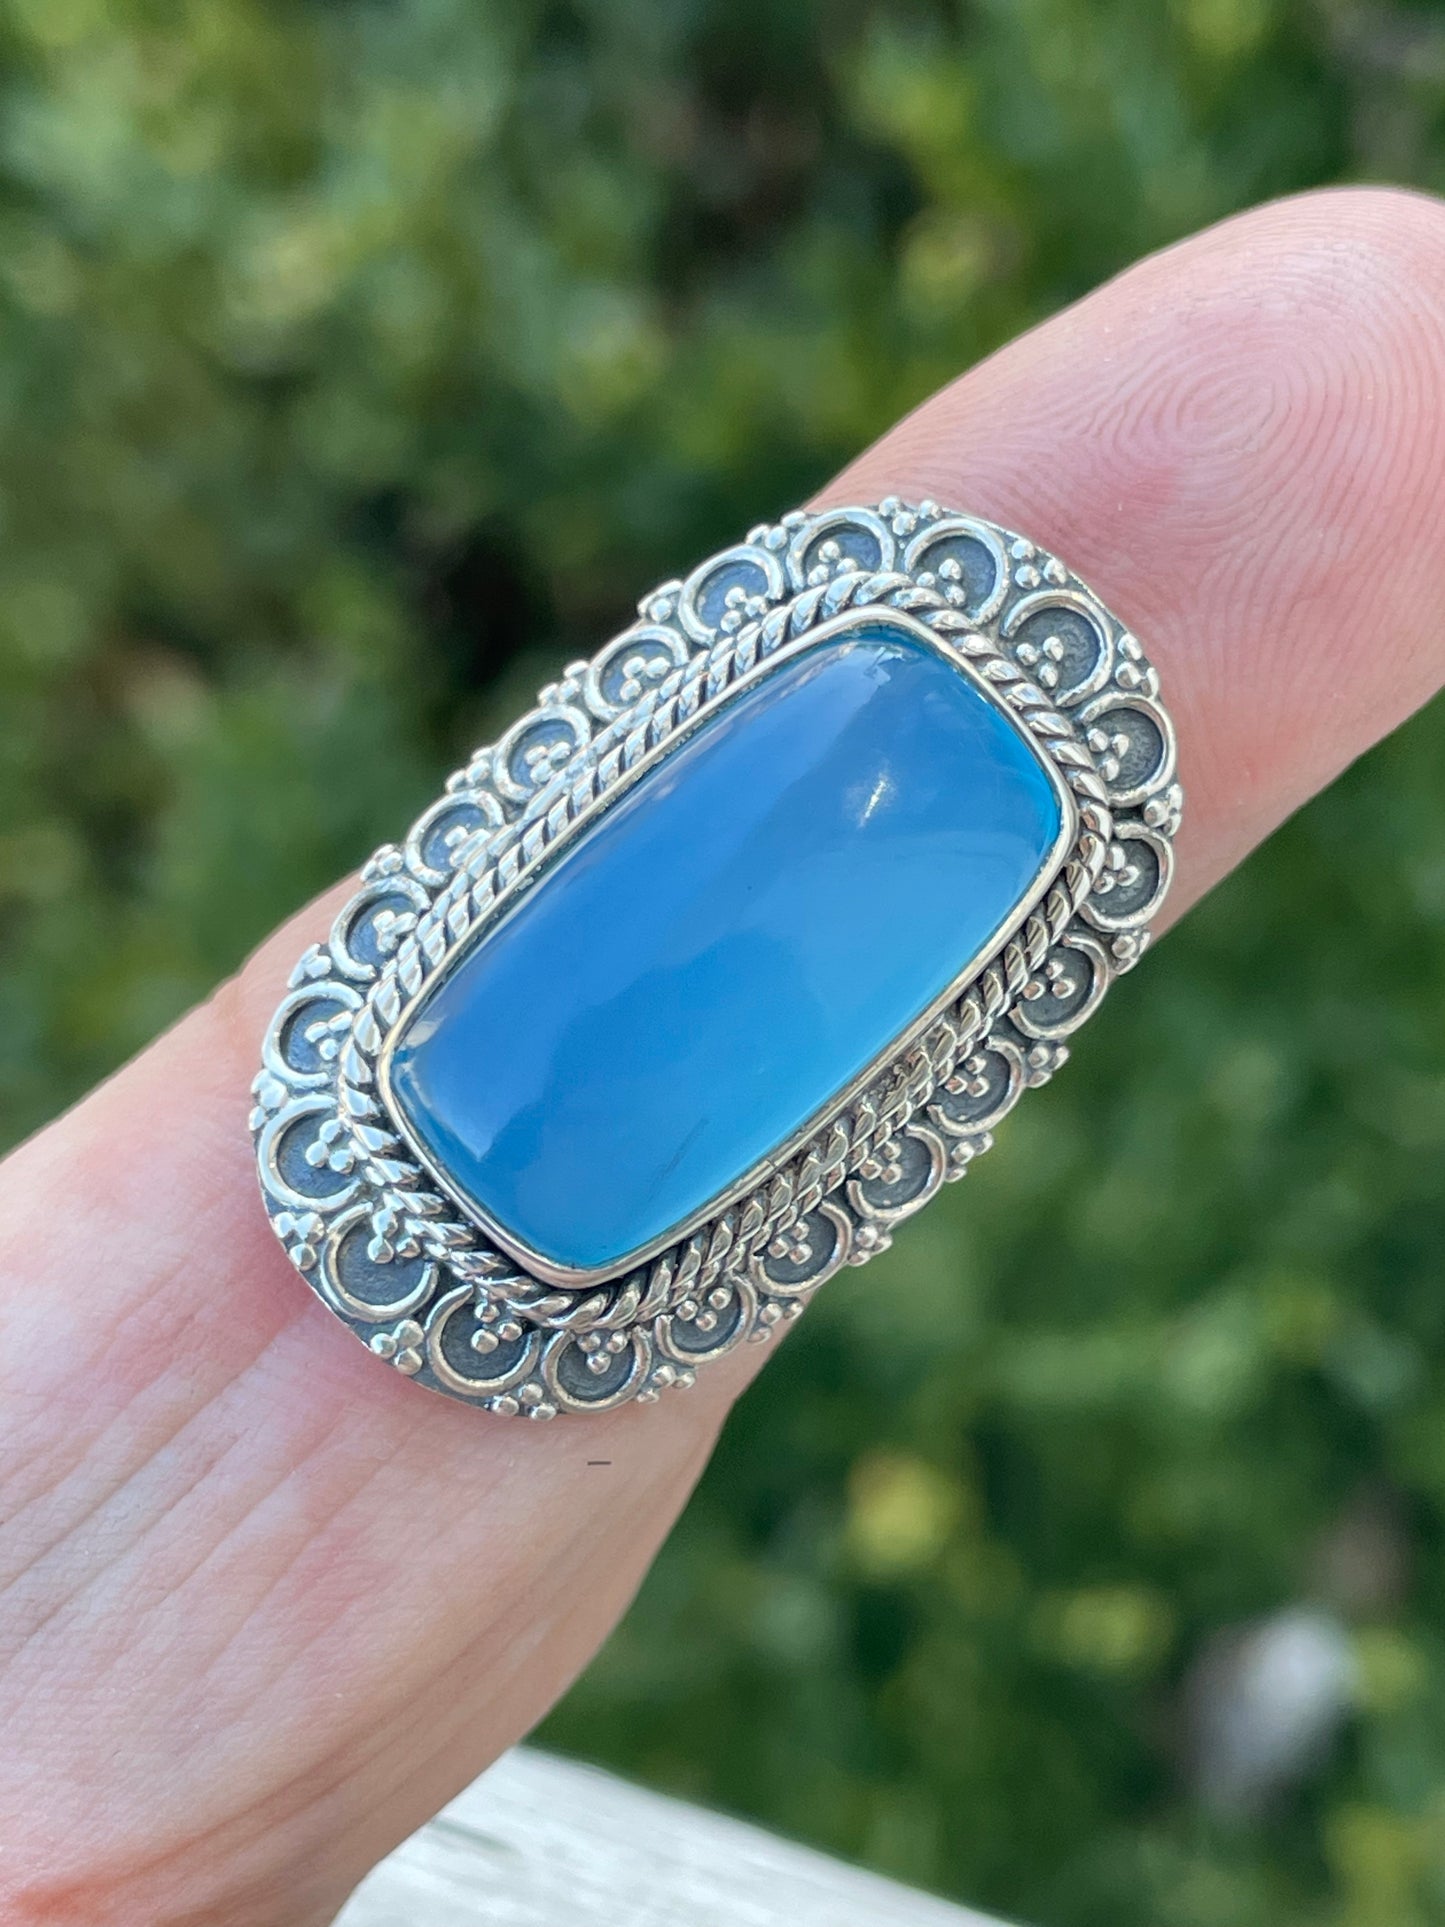 925 Sterling Silver Blue Chalcedony Curved Shield Filigree Ring